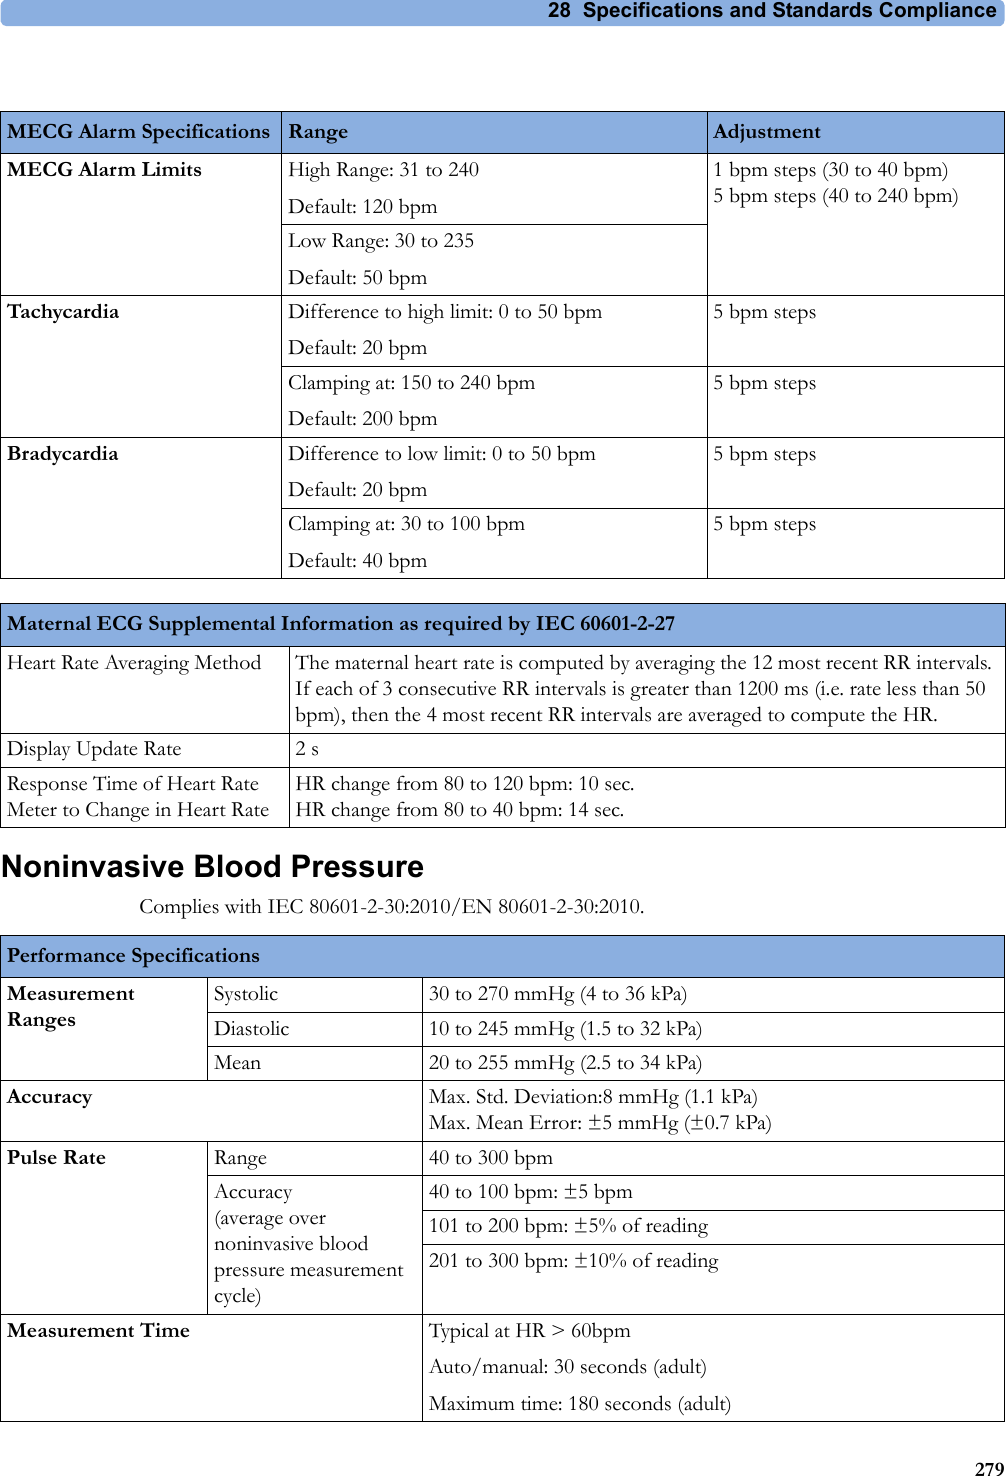 28 Specifications and Standards Compliance279Noninvasive Blood PressureComplies with IEC 80601-2-30:2010/EN 80601-2-30:2010.MECG Alarm Specifications Range AdjustmentMECG Alarm Limits High Range: 31 to 240Default: 120 bpm1 bpm steps (30 to 40 bpm)5 bpm steps (40 to 240 bpm)Low Range: 30 to 235Default: 50 bpmTachycardia Difference to high limit: 0 to 50 bpmDefault: 20 bpm5 bpm stepsClamping at: 150 to 240 bpmDefault: 200 bpm5 bpm stepsBradycardia Difference to low limit: 0 to 50 bpmDefault: 20 bpm5 bpm stepsClamping at: 30 to 100 bpmDefault: 40 bpm5 bpm stepsMaternal ECG Supplemental Information as required by IEC 60601-2-27Heart Rate Averaging Method The maternal heart rate is computed by averaging the 12 most recent RR intervals. If each of 3 consecutive RR intervals is greater than 1200 ms (i.e. rate less than 50 bpm), then the 4 most recent RR intervals are averaged to compute the HR.Display Update Rate 2 sResponse Time of Heart Rate Meter to Change in Heart RateHR change from 80 to 120 bpm: 10 sec.HR change from 80 to 40 bpm: 14 sec.Performance Specifications Measurement RangesSystolic 30 to 270 mmHg (4 to 36 kPa)Diastolic 10 to 245 mmHg (1.5 to 32 kPa)Mean 20 to 255 mmHg (2.5 to 34 kPa)Accuracy Max. Std. Deviation:8 mmHg (1.1 kPa)Max. Mean Error: ±5 mmHg (±0.7 kPa)Pulse Rate Range 40 to 300 bpmAccuracy(average over noninvasive blood pressure measurement cycle)40 to 100 bpm: ±5 bpm101 to 200 bpm: ±5% of reading201 to 300 bpm: ±10% of readingMeasurement Time Typical at HR &gt; 60bpmAuto/manual: 30 seconds (adult)Maximum time: 180 seconds (adult)